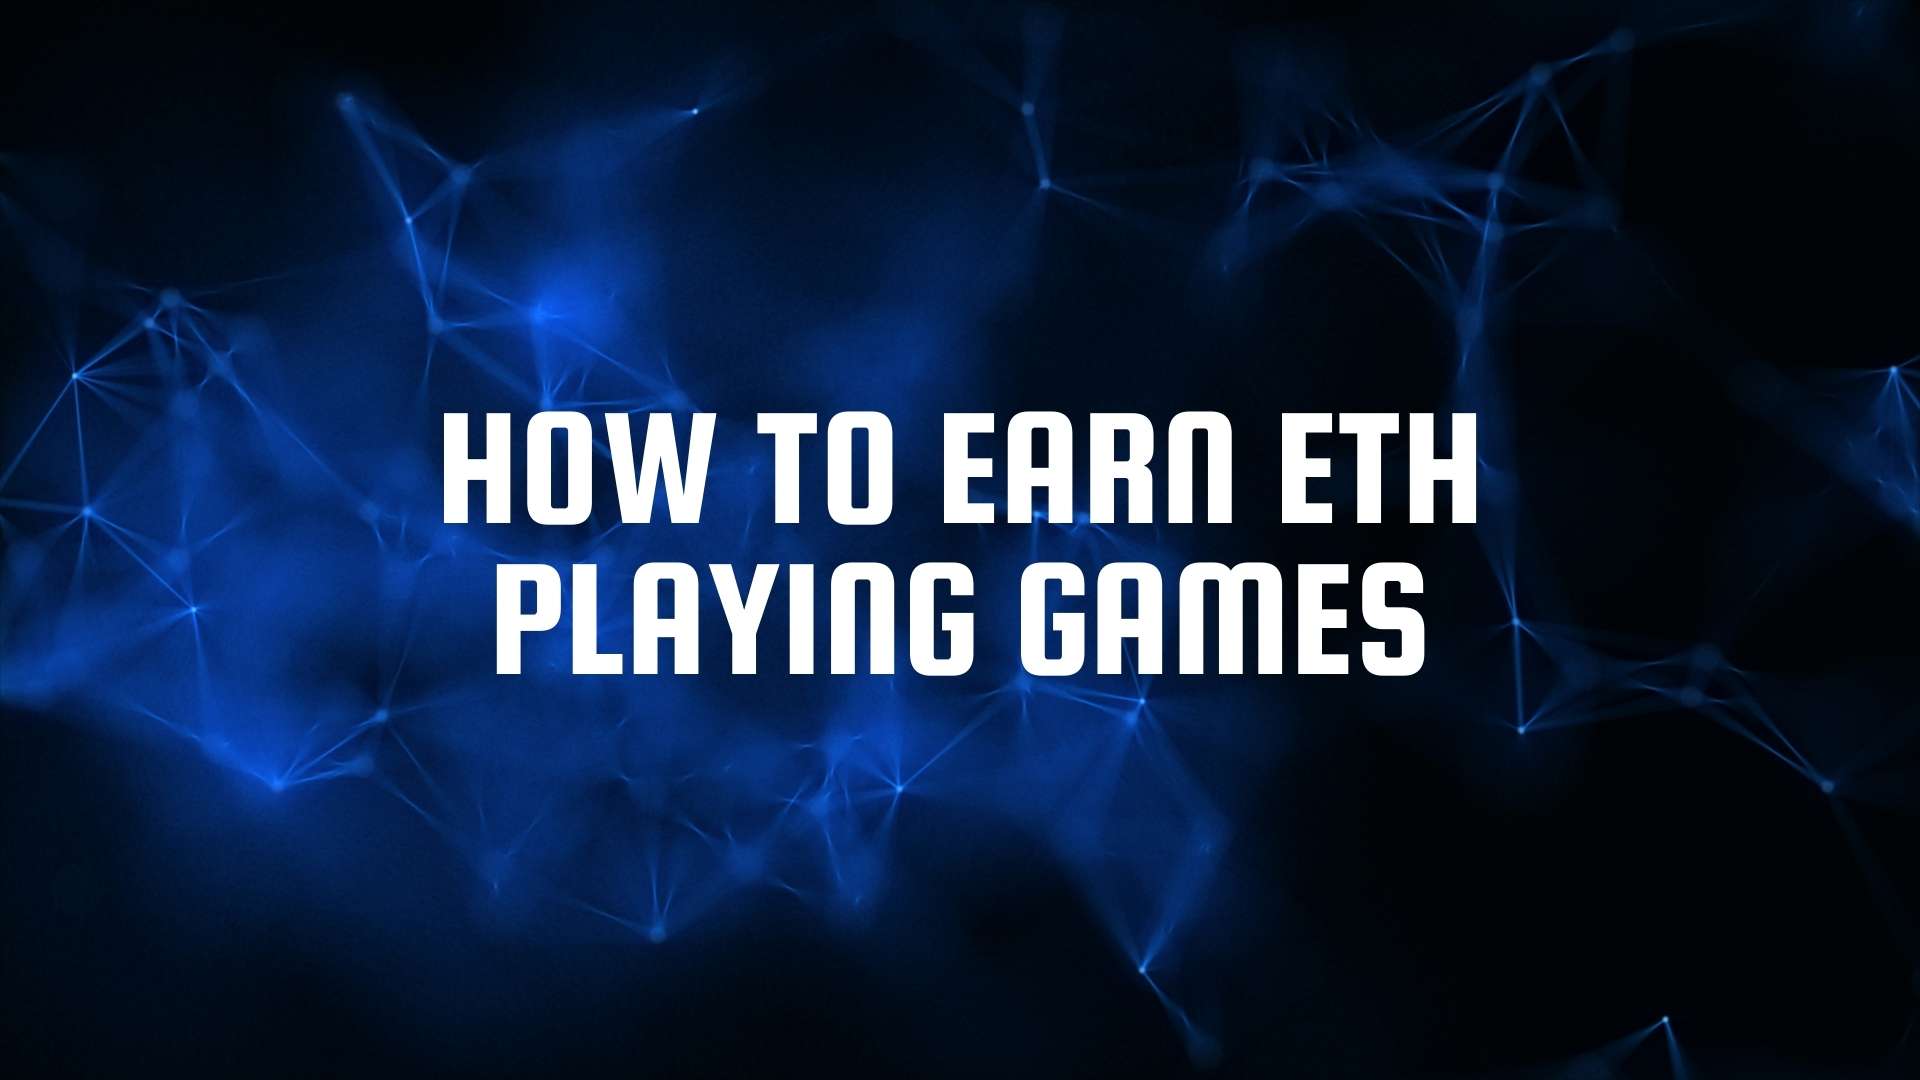 How to Earn Ethereum Playing NFT games